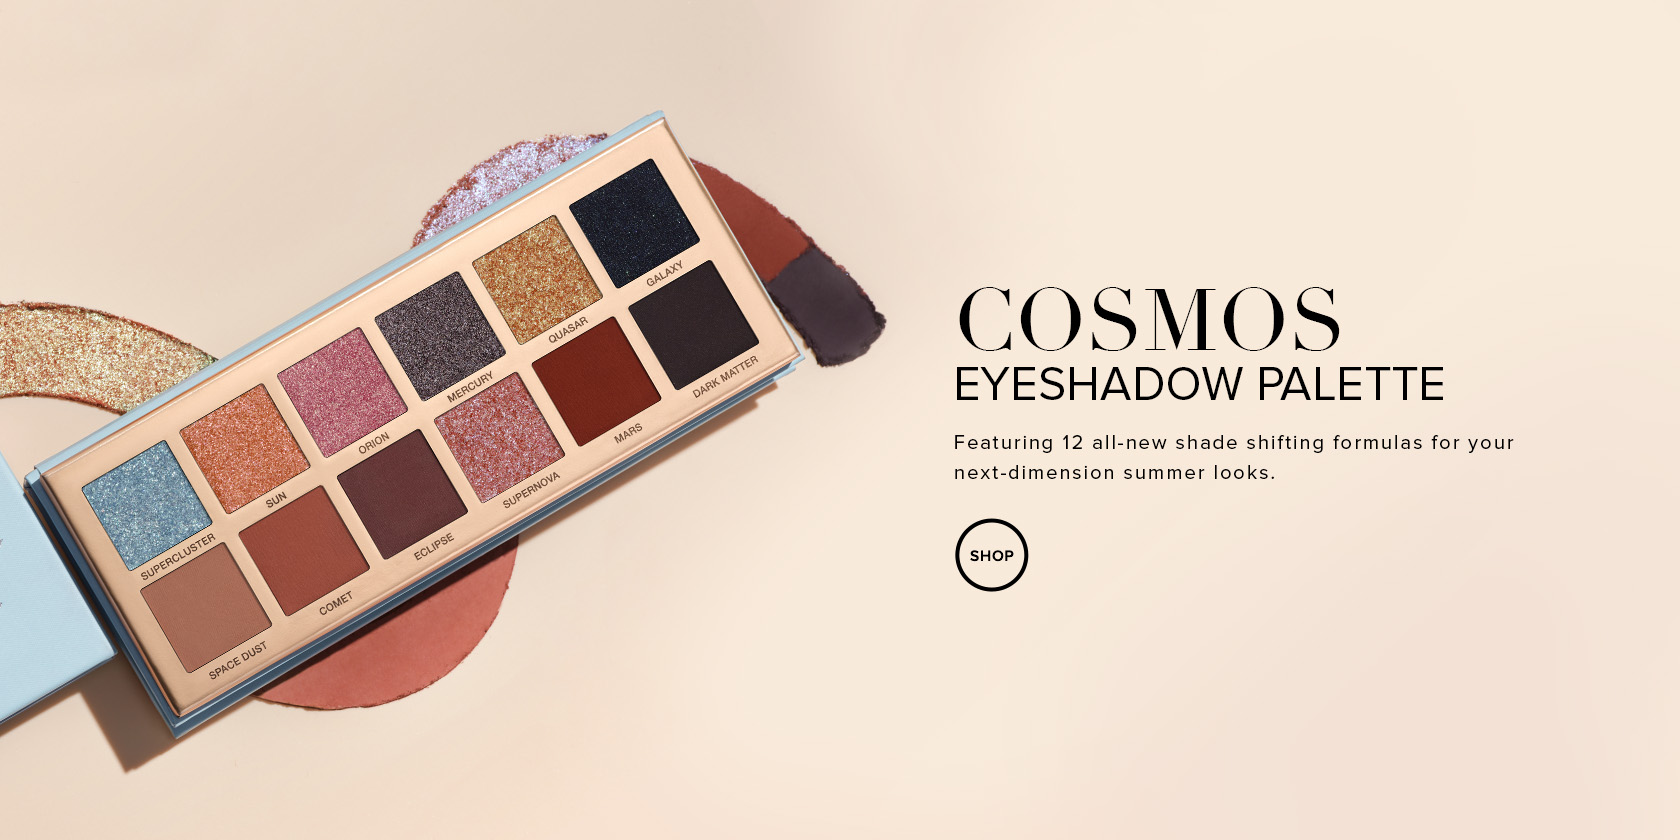 Cosmos Eyeshadow Palette. Featuring 12 all-new shade shifting formulas for your next-dimension summer looks.